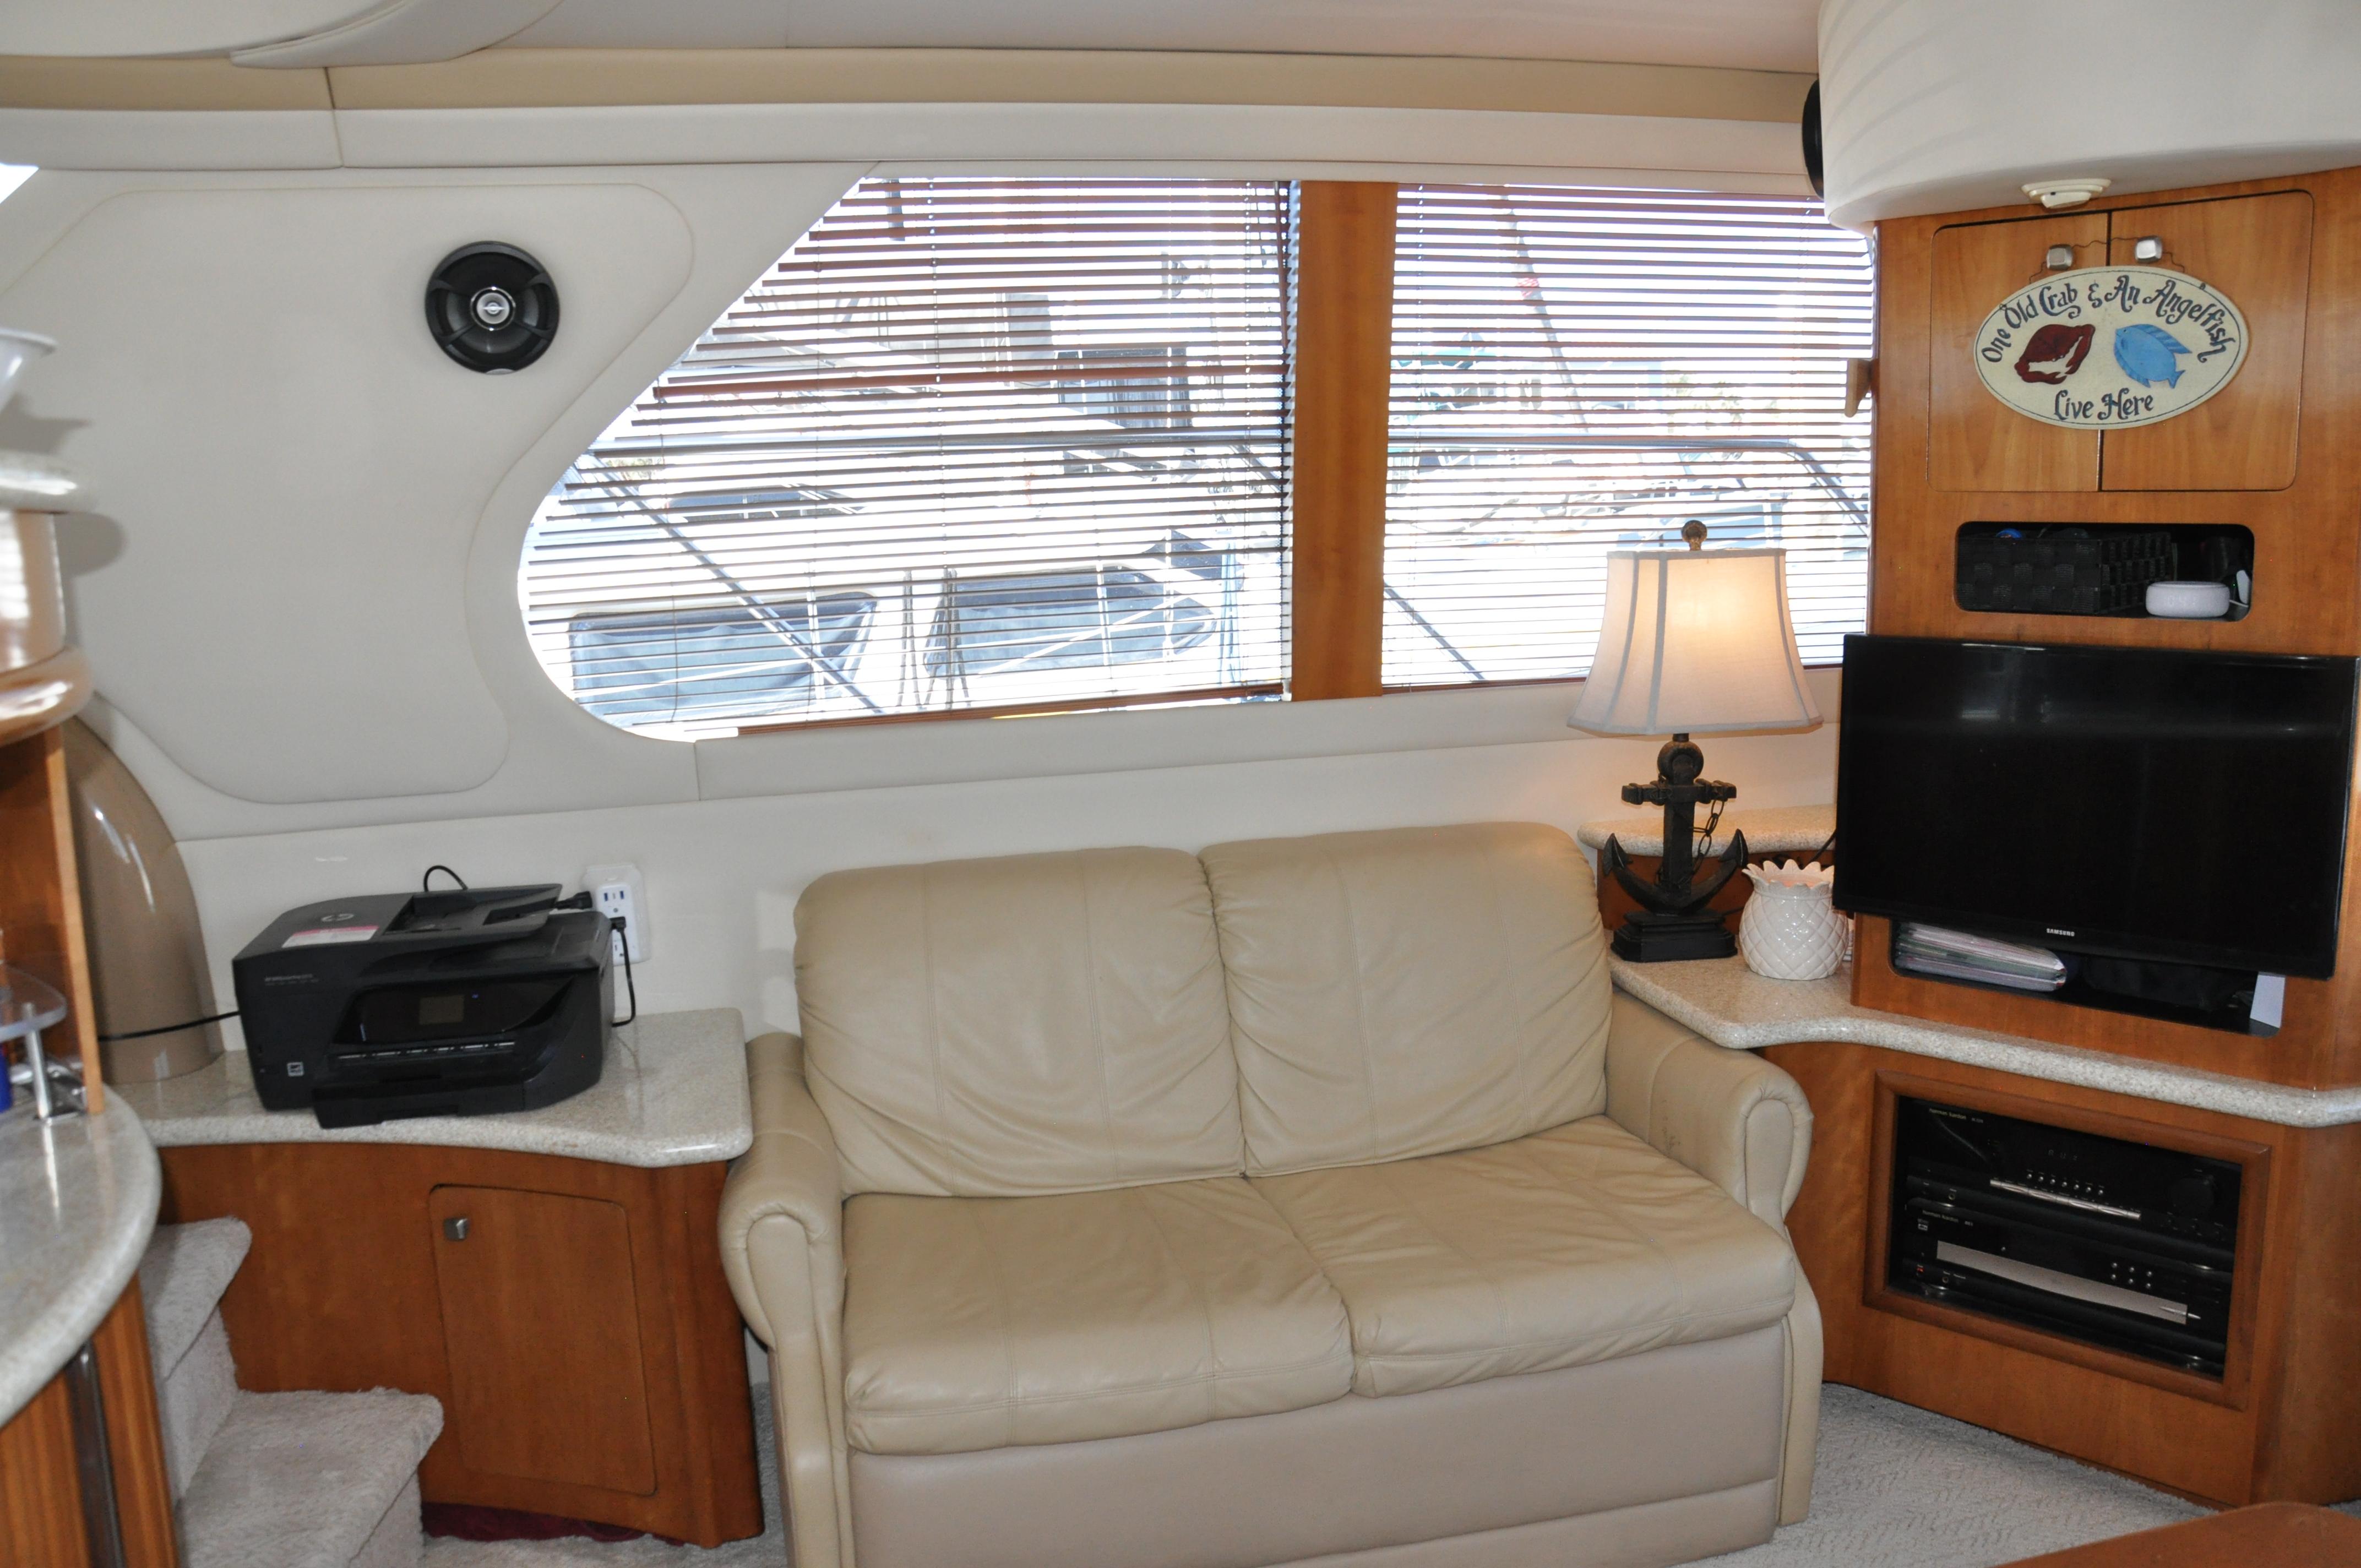 2001 Carver 450 Voyager Pilothouse